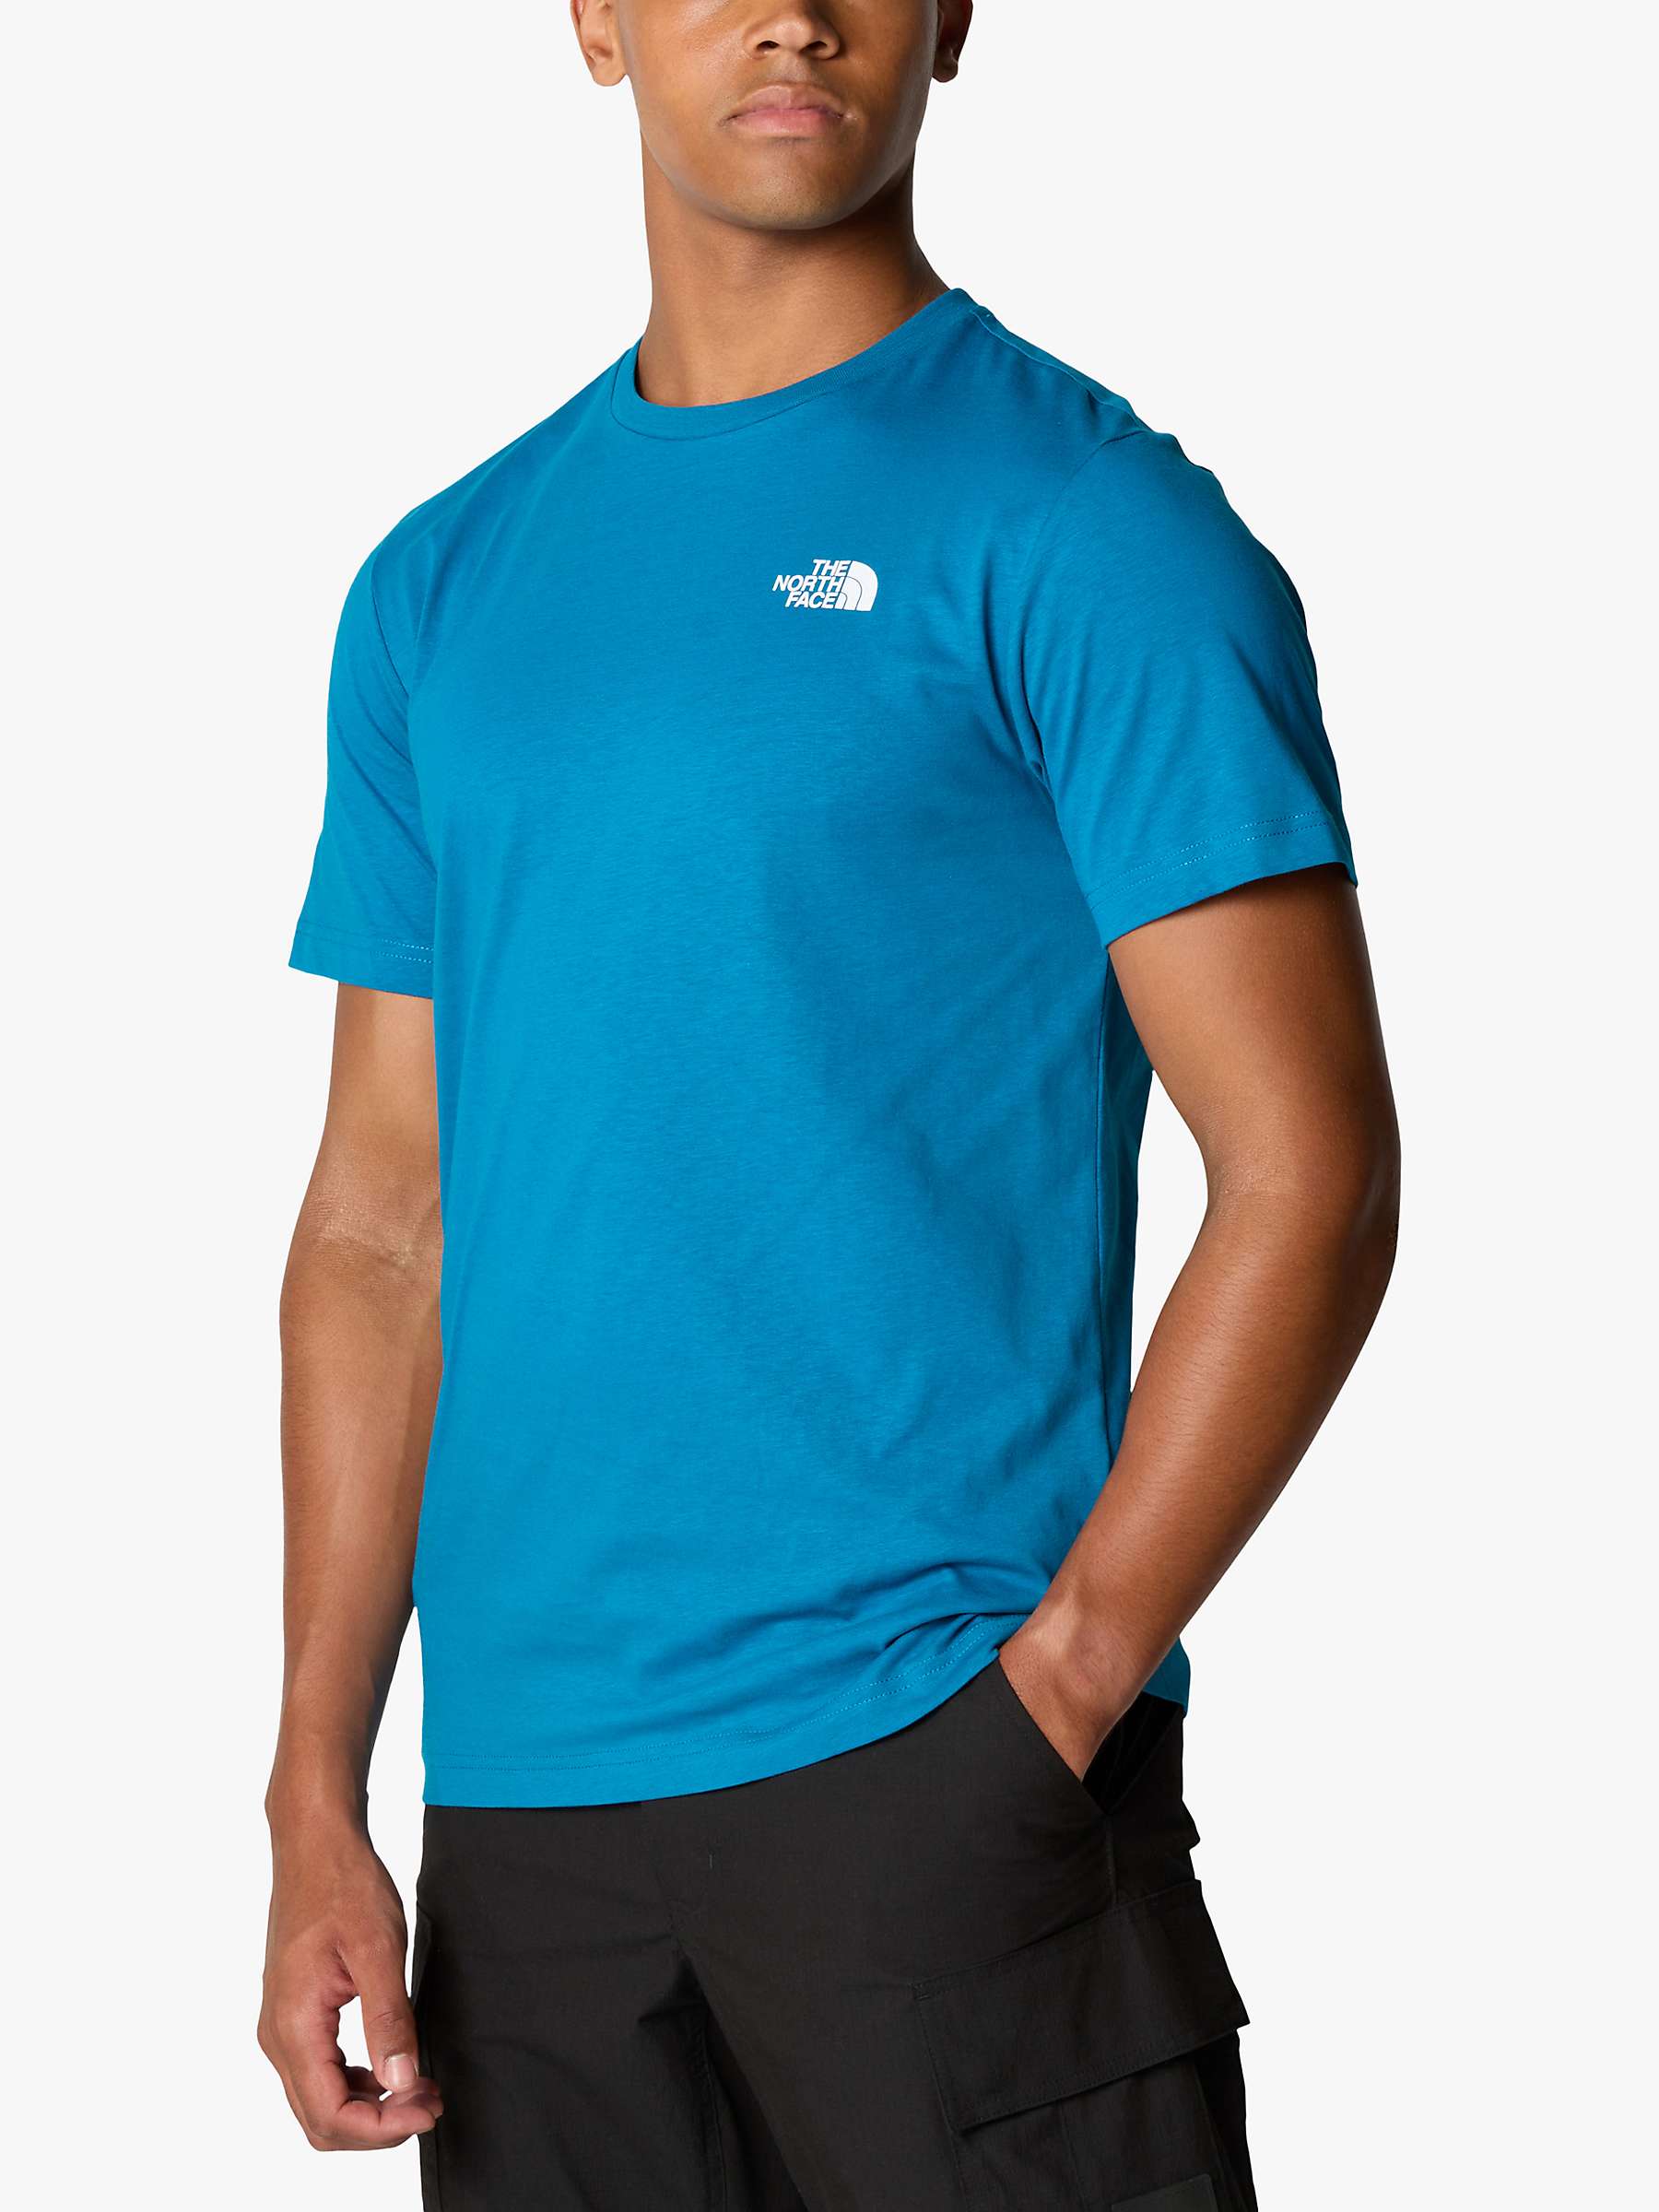 Buy The North Face Waterbased Graphic Short Sleeve T-Shirt, Adriatic Blue Online at johnlewis.com